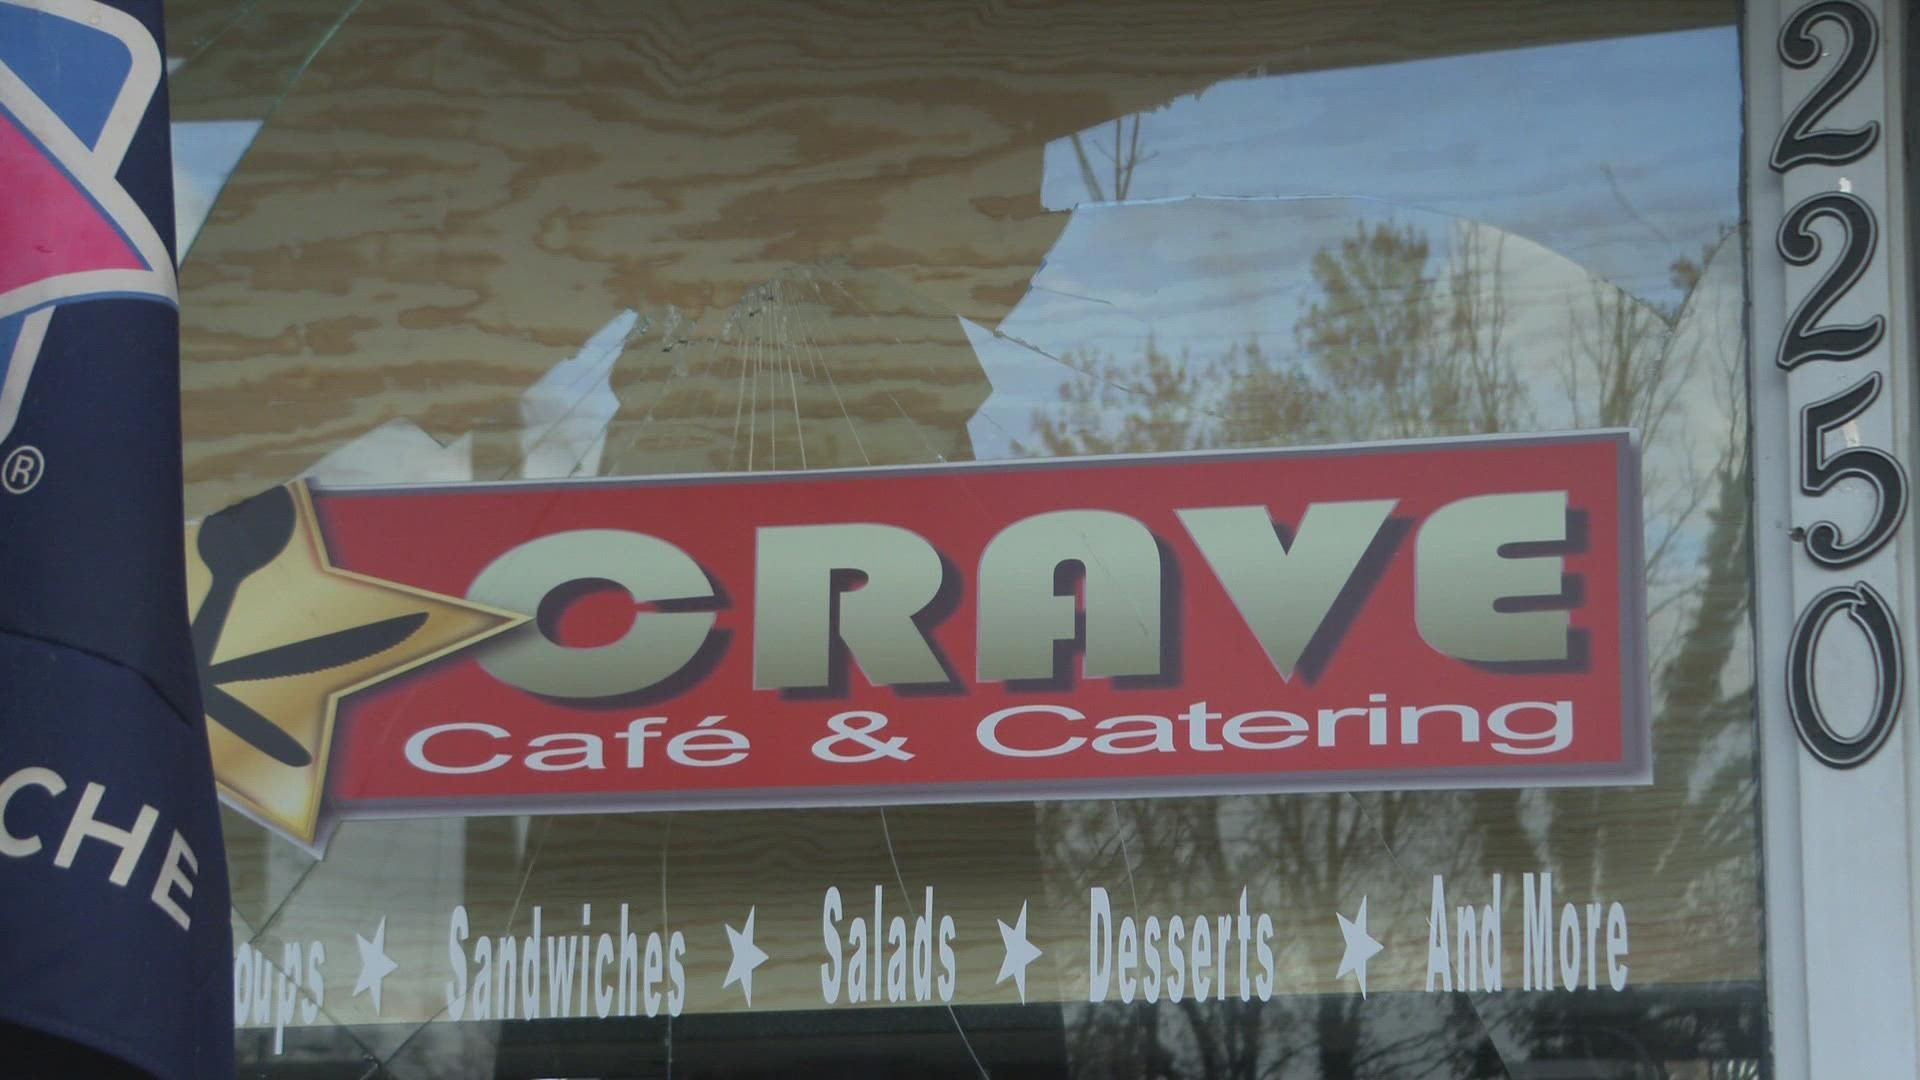 Crave Café and Catering was vandalized over Thanksgiving weekend.